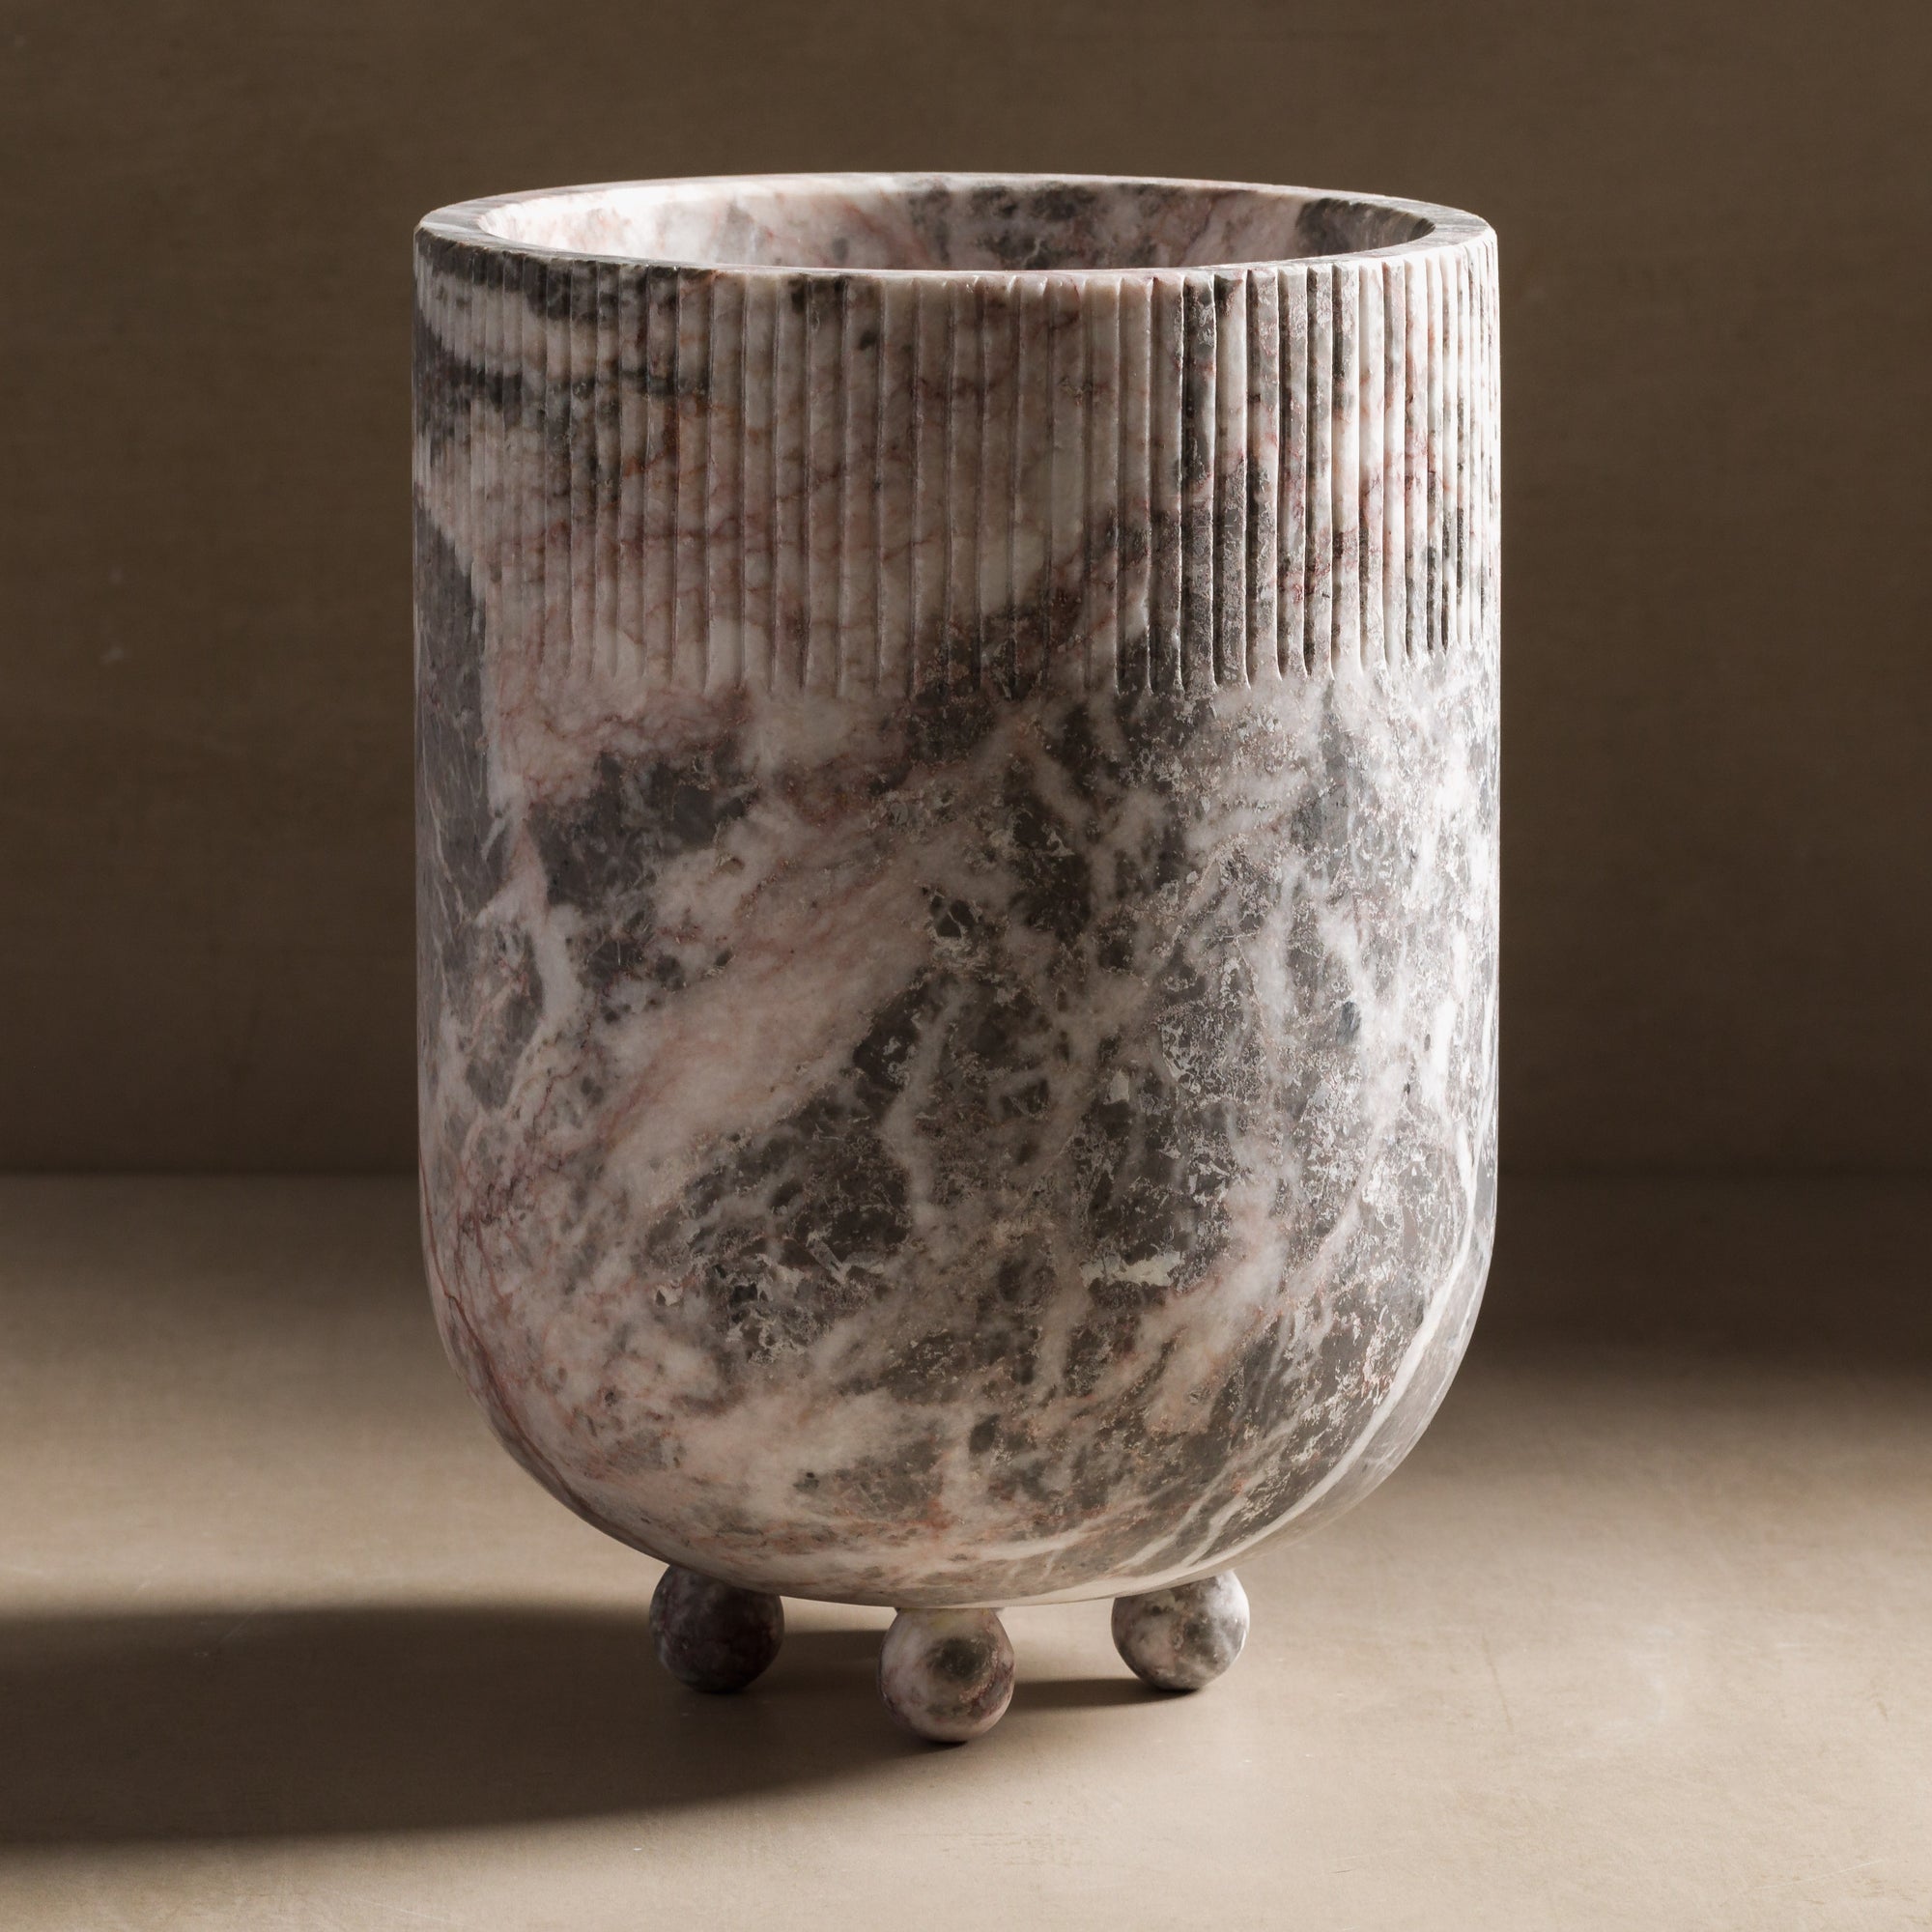 Ceres stone vessel made from honed grey marble